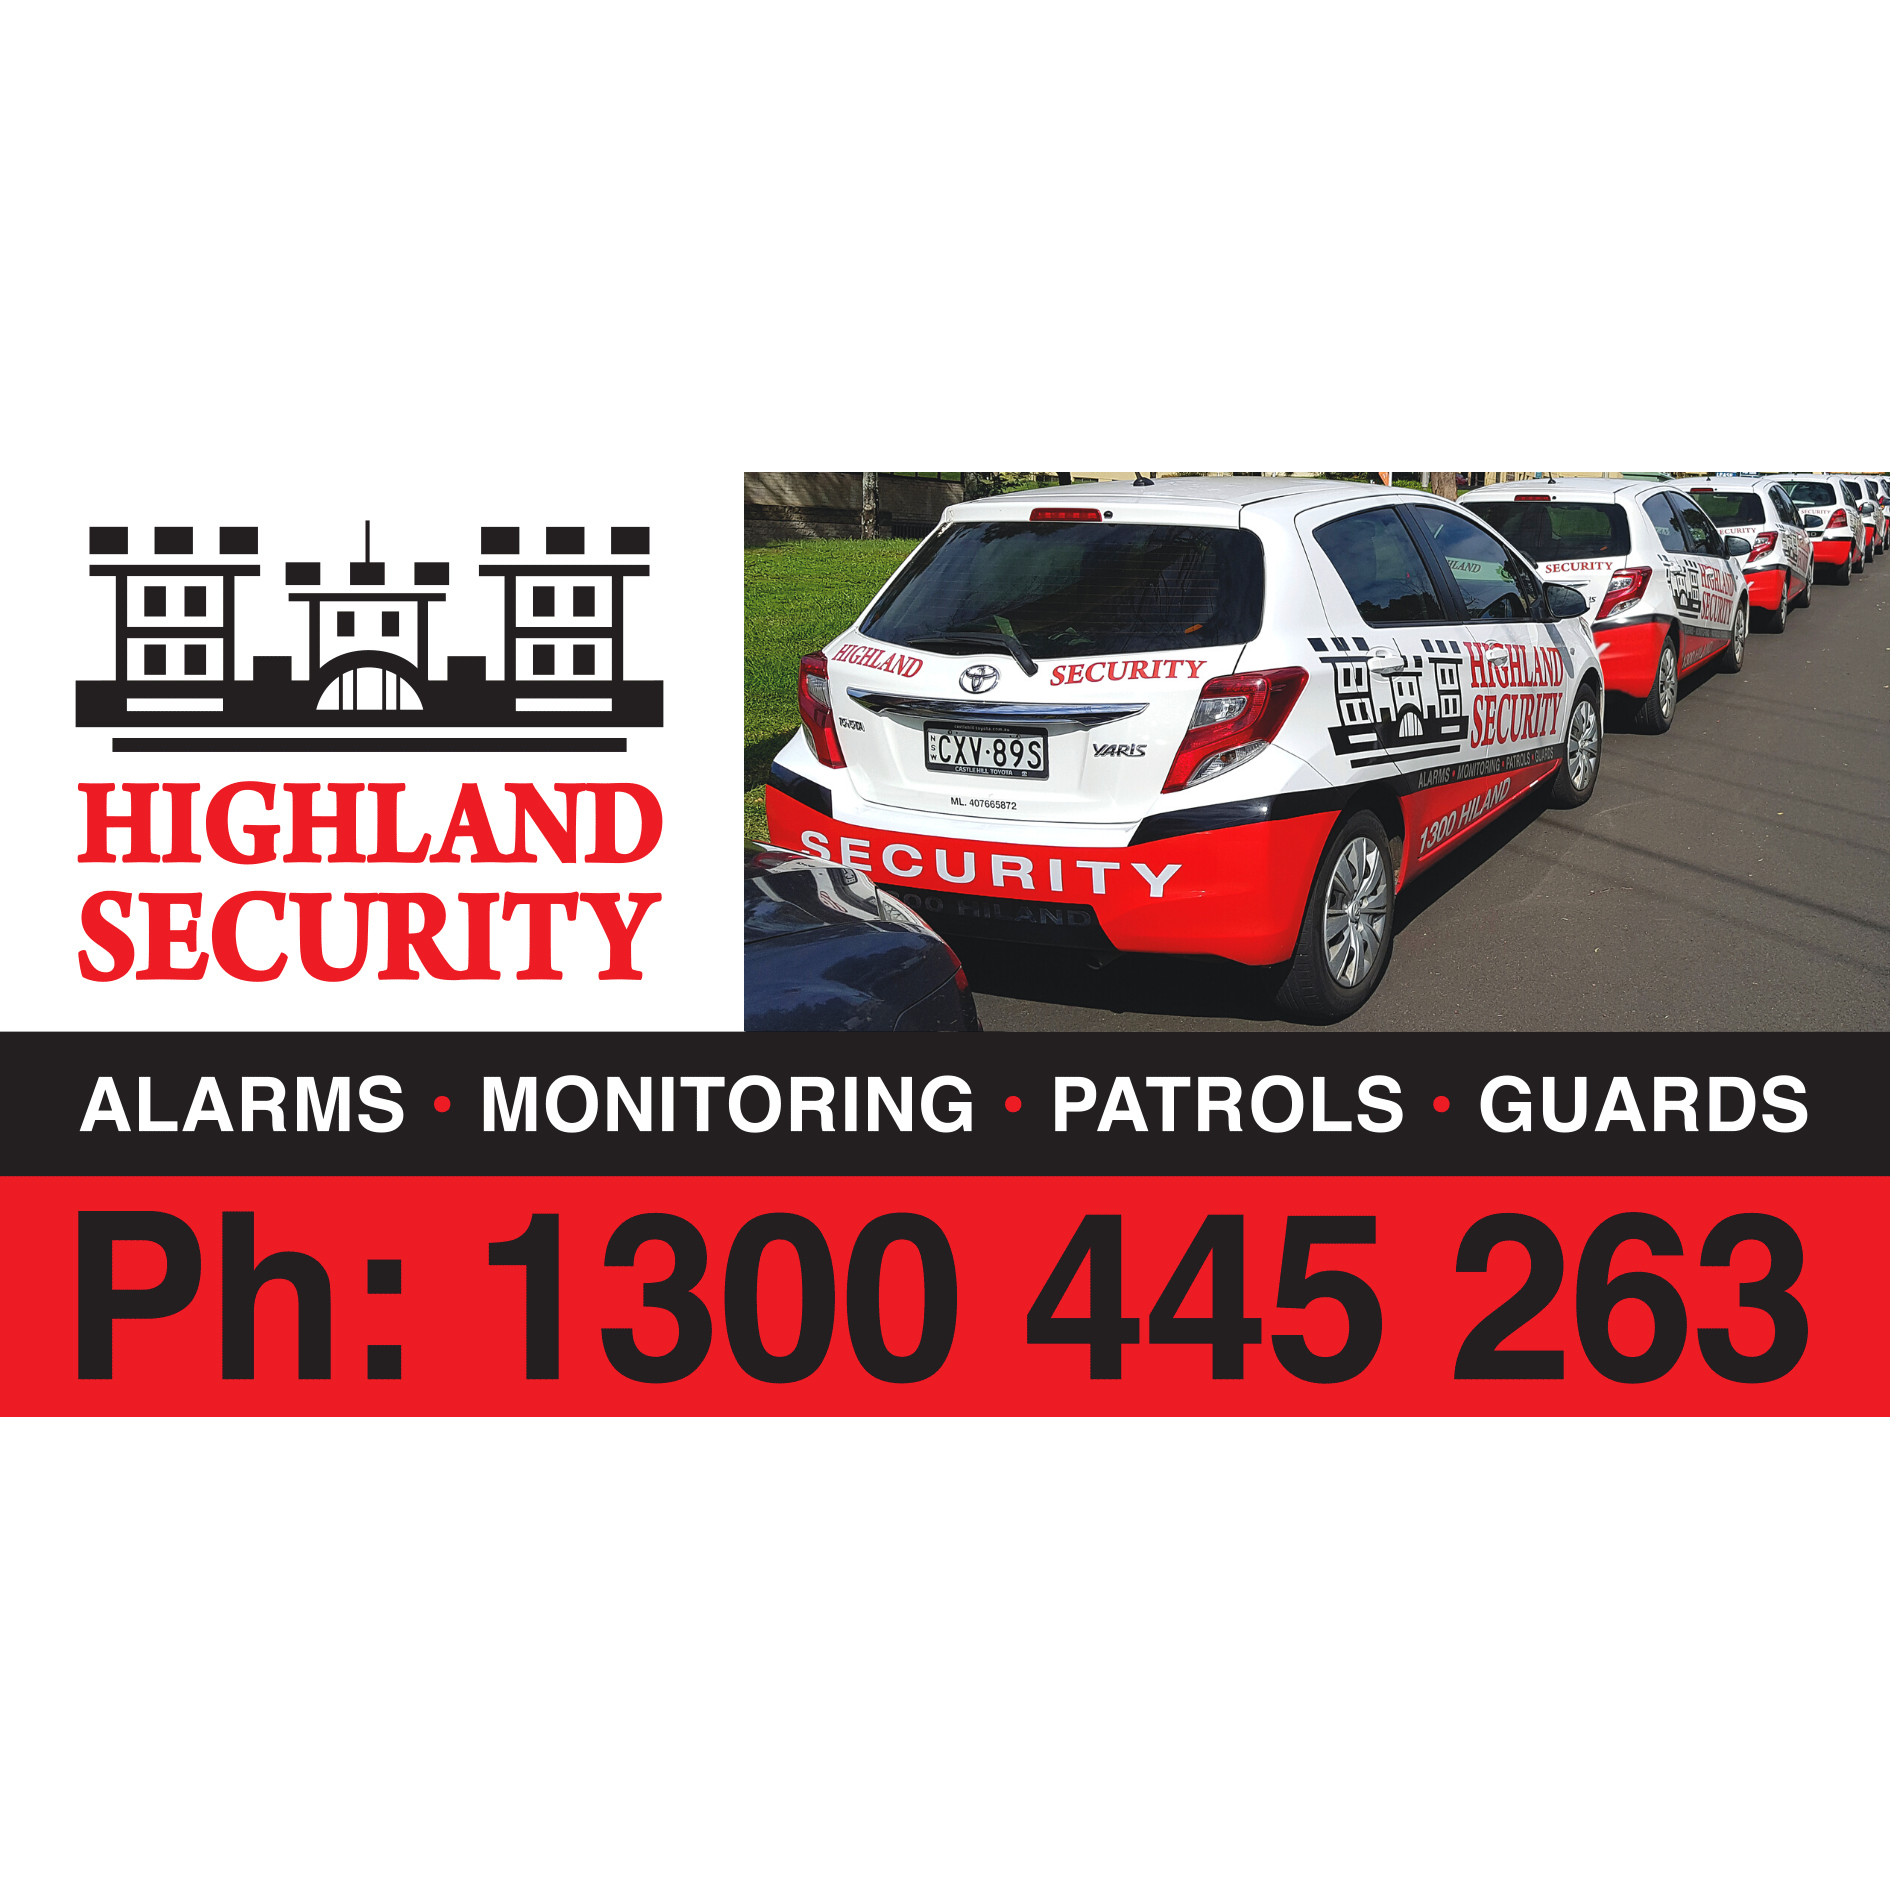 Highland Security Services - Castle Hill, NSW 2154 - (02) 9680 9419 | ShowMeLocal.com